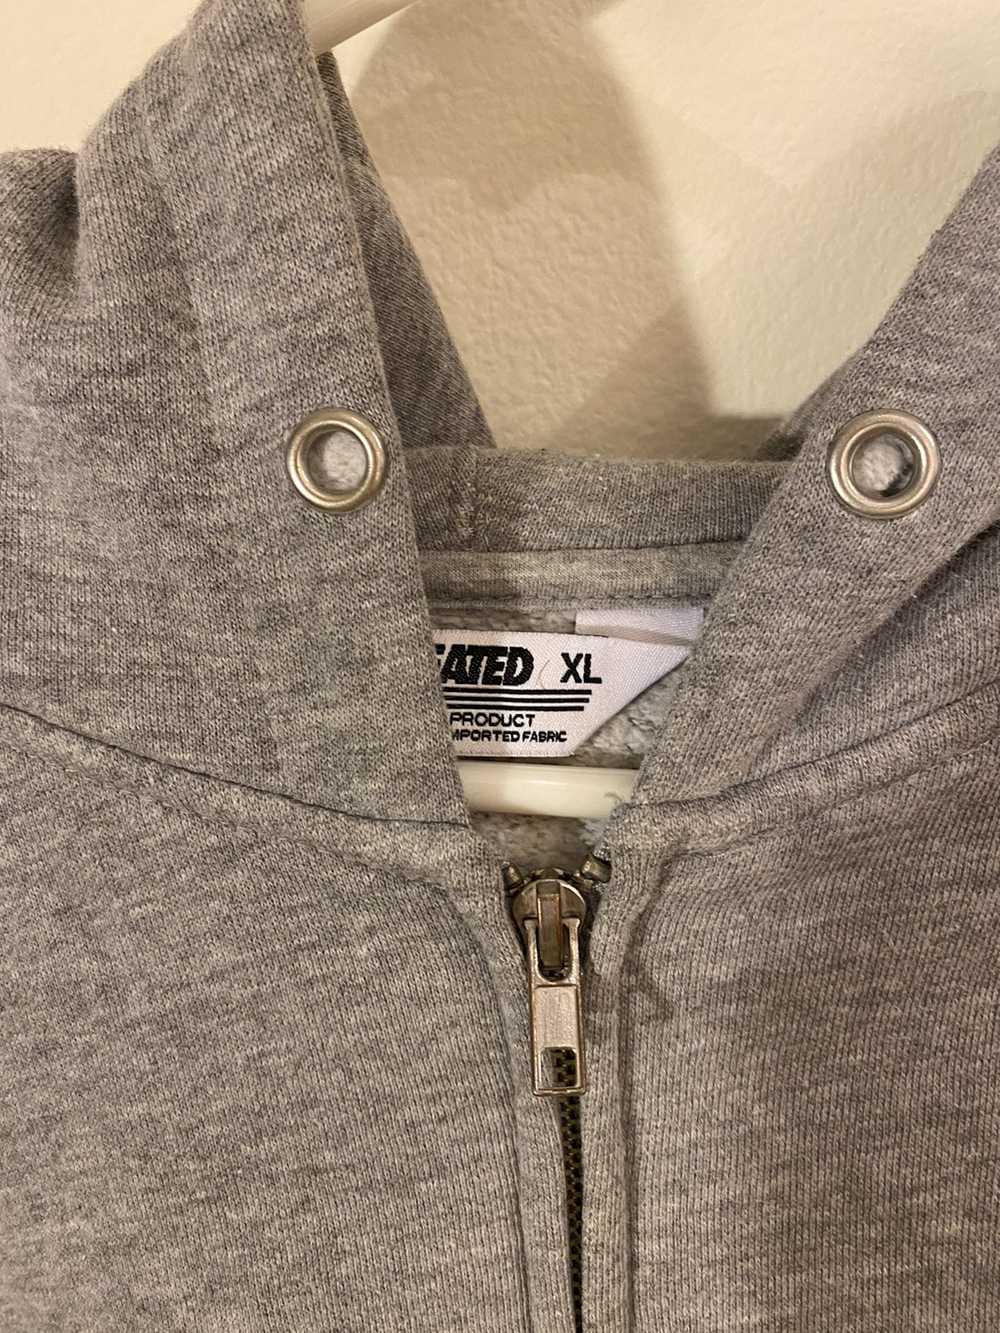 Halo × Undefeated Grey Undefeated Halo 5 Hoodie XL - image 3